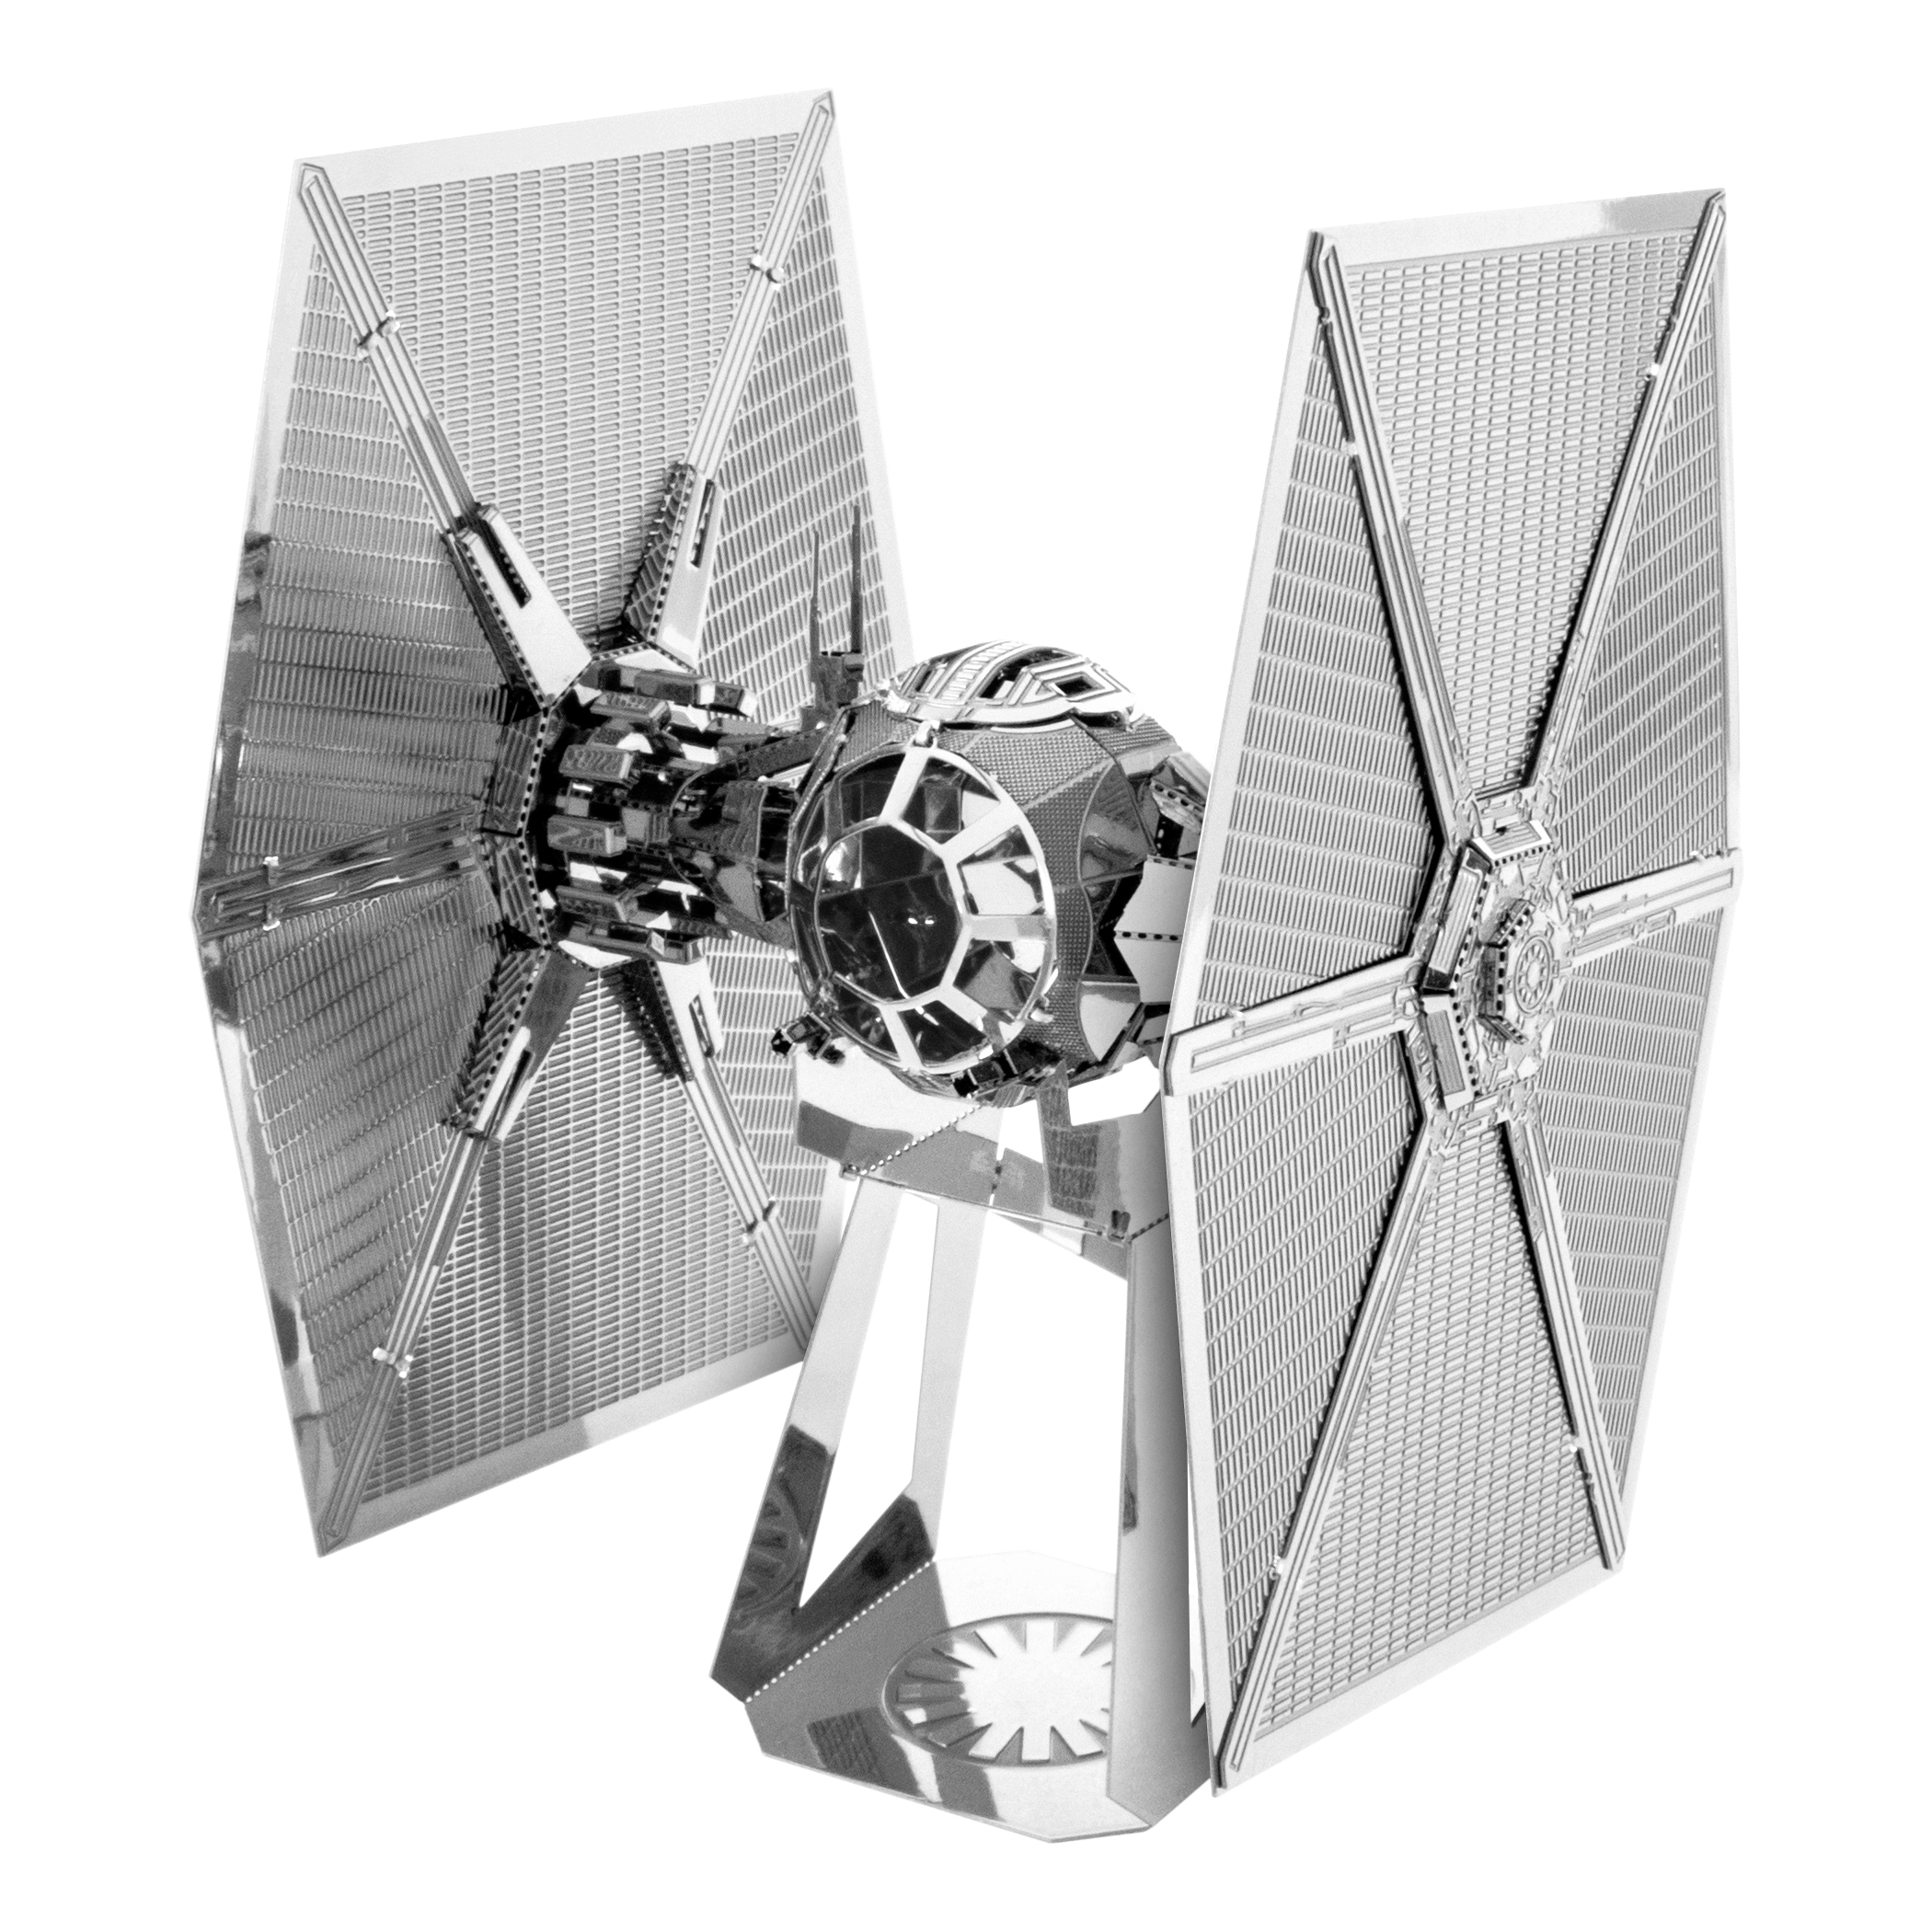 Fascinations Toys & Gifts Metal Earth 3D Laser Cut Model - Star Wars Episode 7 Special Forces TIE Fighter